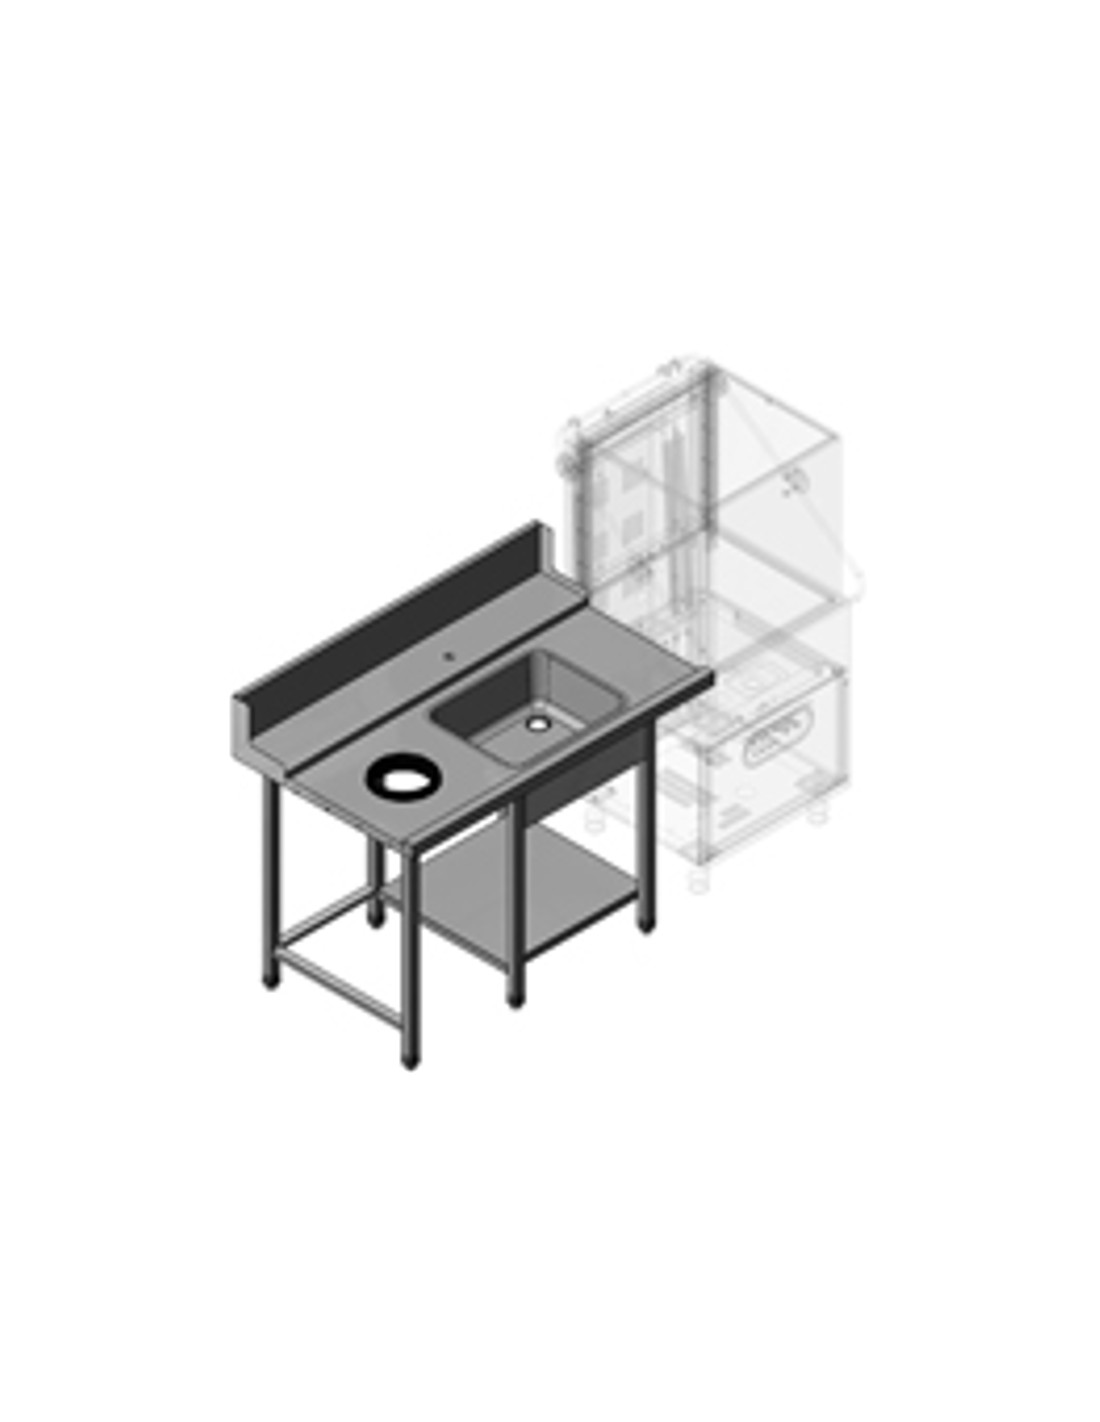 Dishwasher entry table - Left - With sink and disembarkation hole with rubber - Size cm 130 x 79 x 85 h